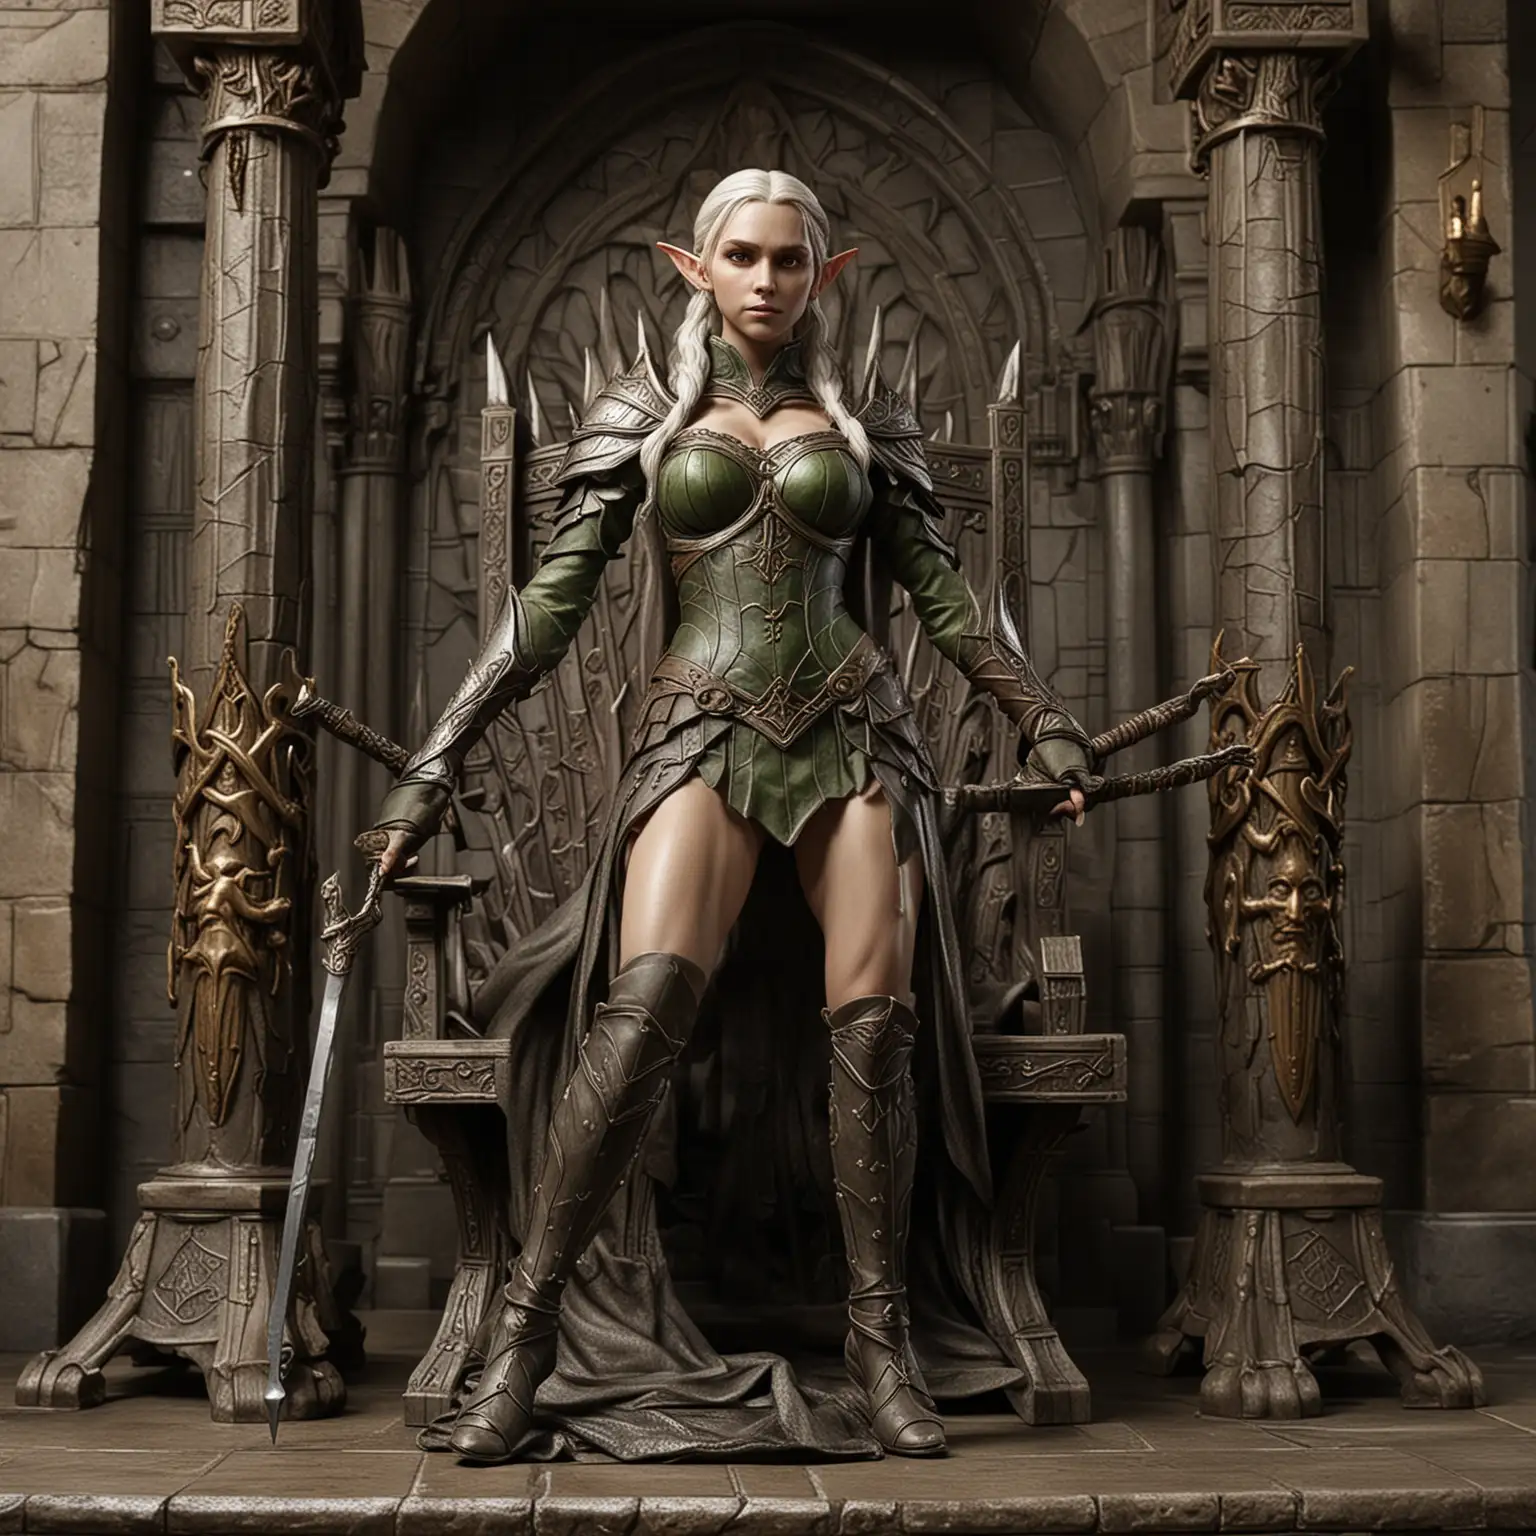 A statue of a female elf stands in front of the throne. The statue is posed as if ready for battle, with a shortsword gripped tightly in each of its hands.